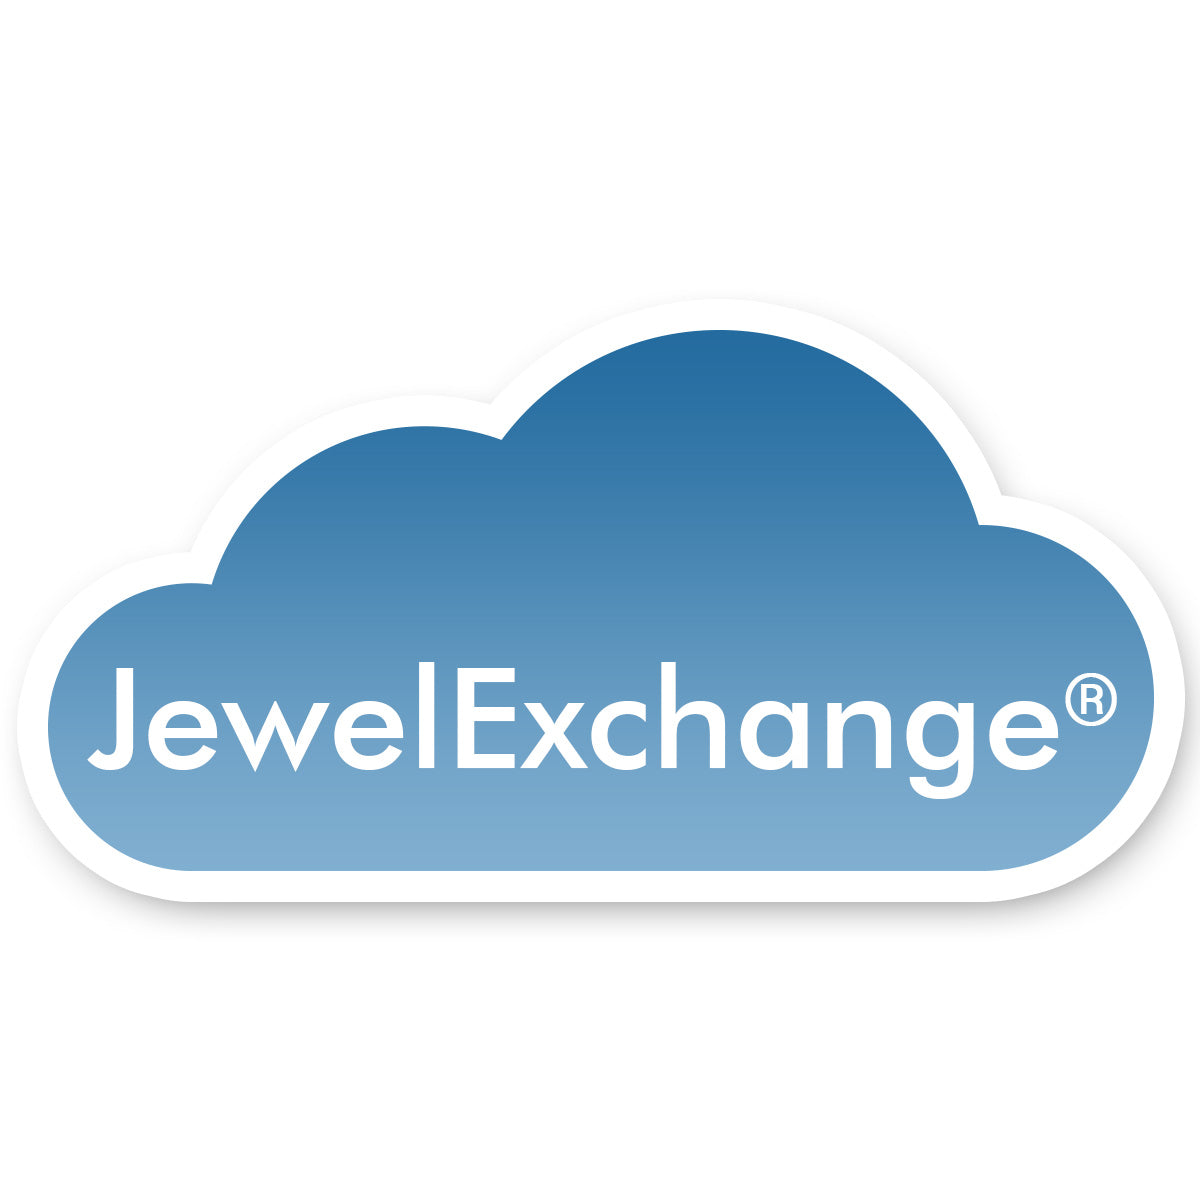 Hire Shopify Experts to integrate JewelExchange Product Feed API app into a Shopify store